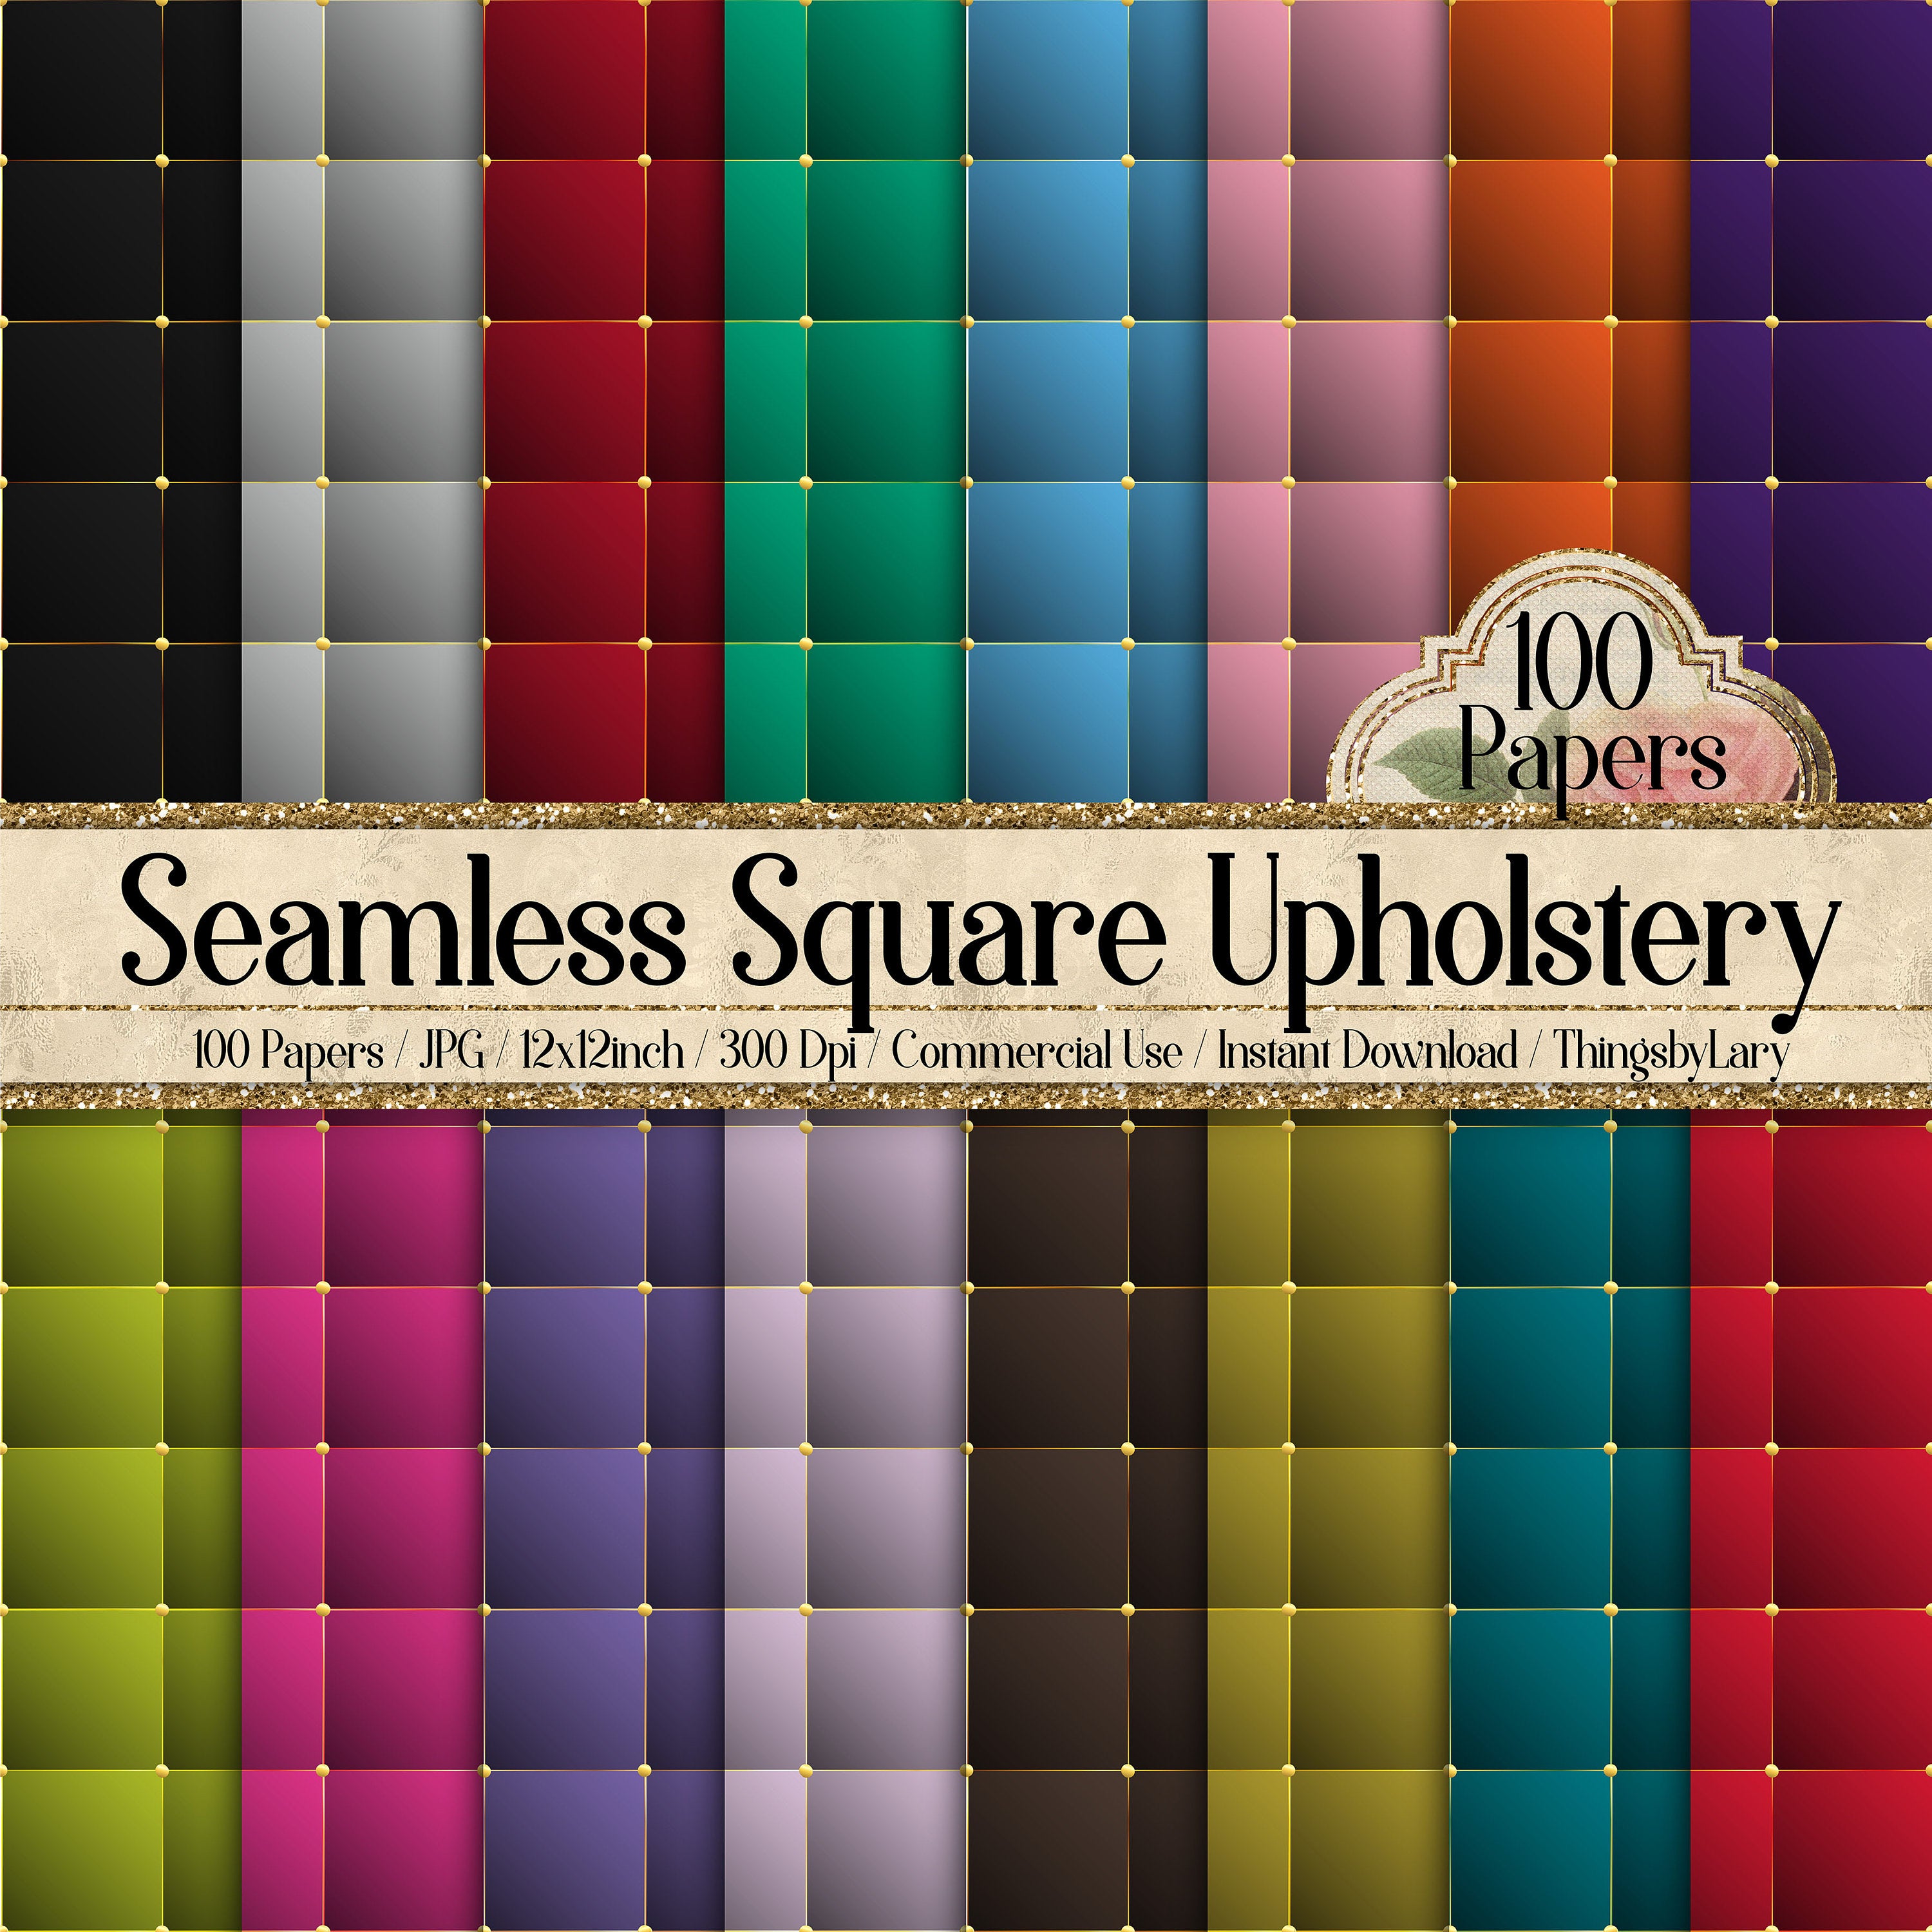 100 Seamless Square Upholstery Digital Papers 12 inch 300 Dpi Instant Download Commercial Use Seamless Gold Quilt Leather Fabric Printable